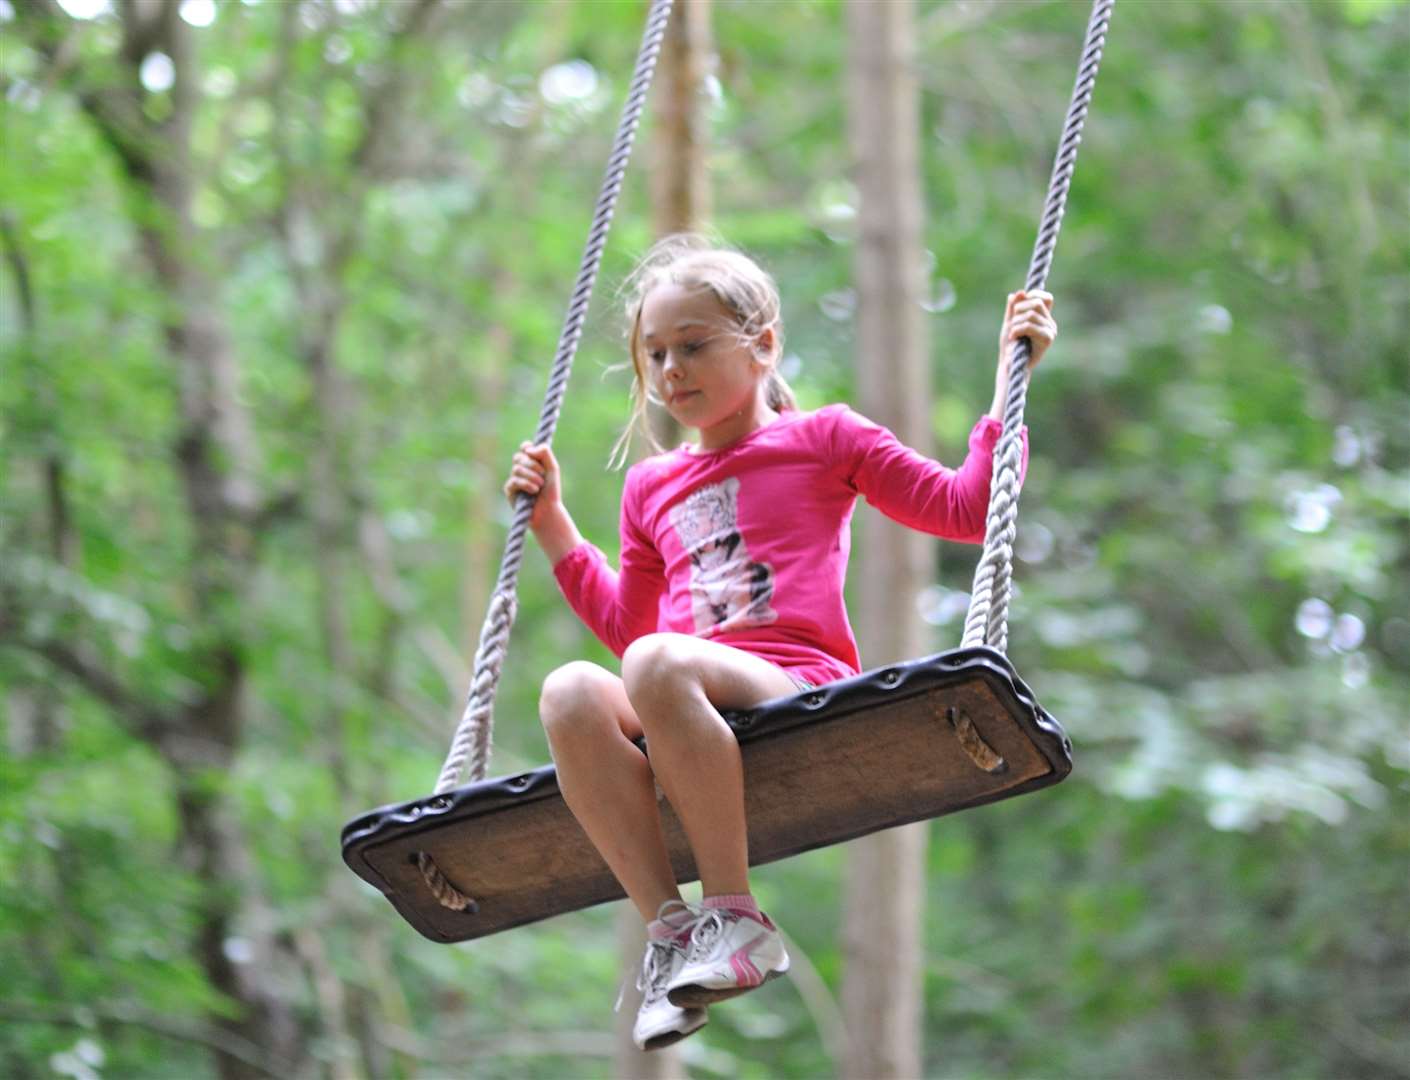 Giant swings are hugely popular at Groombridge